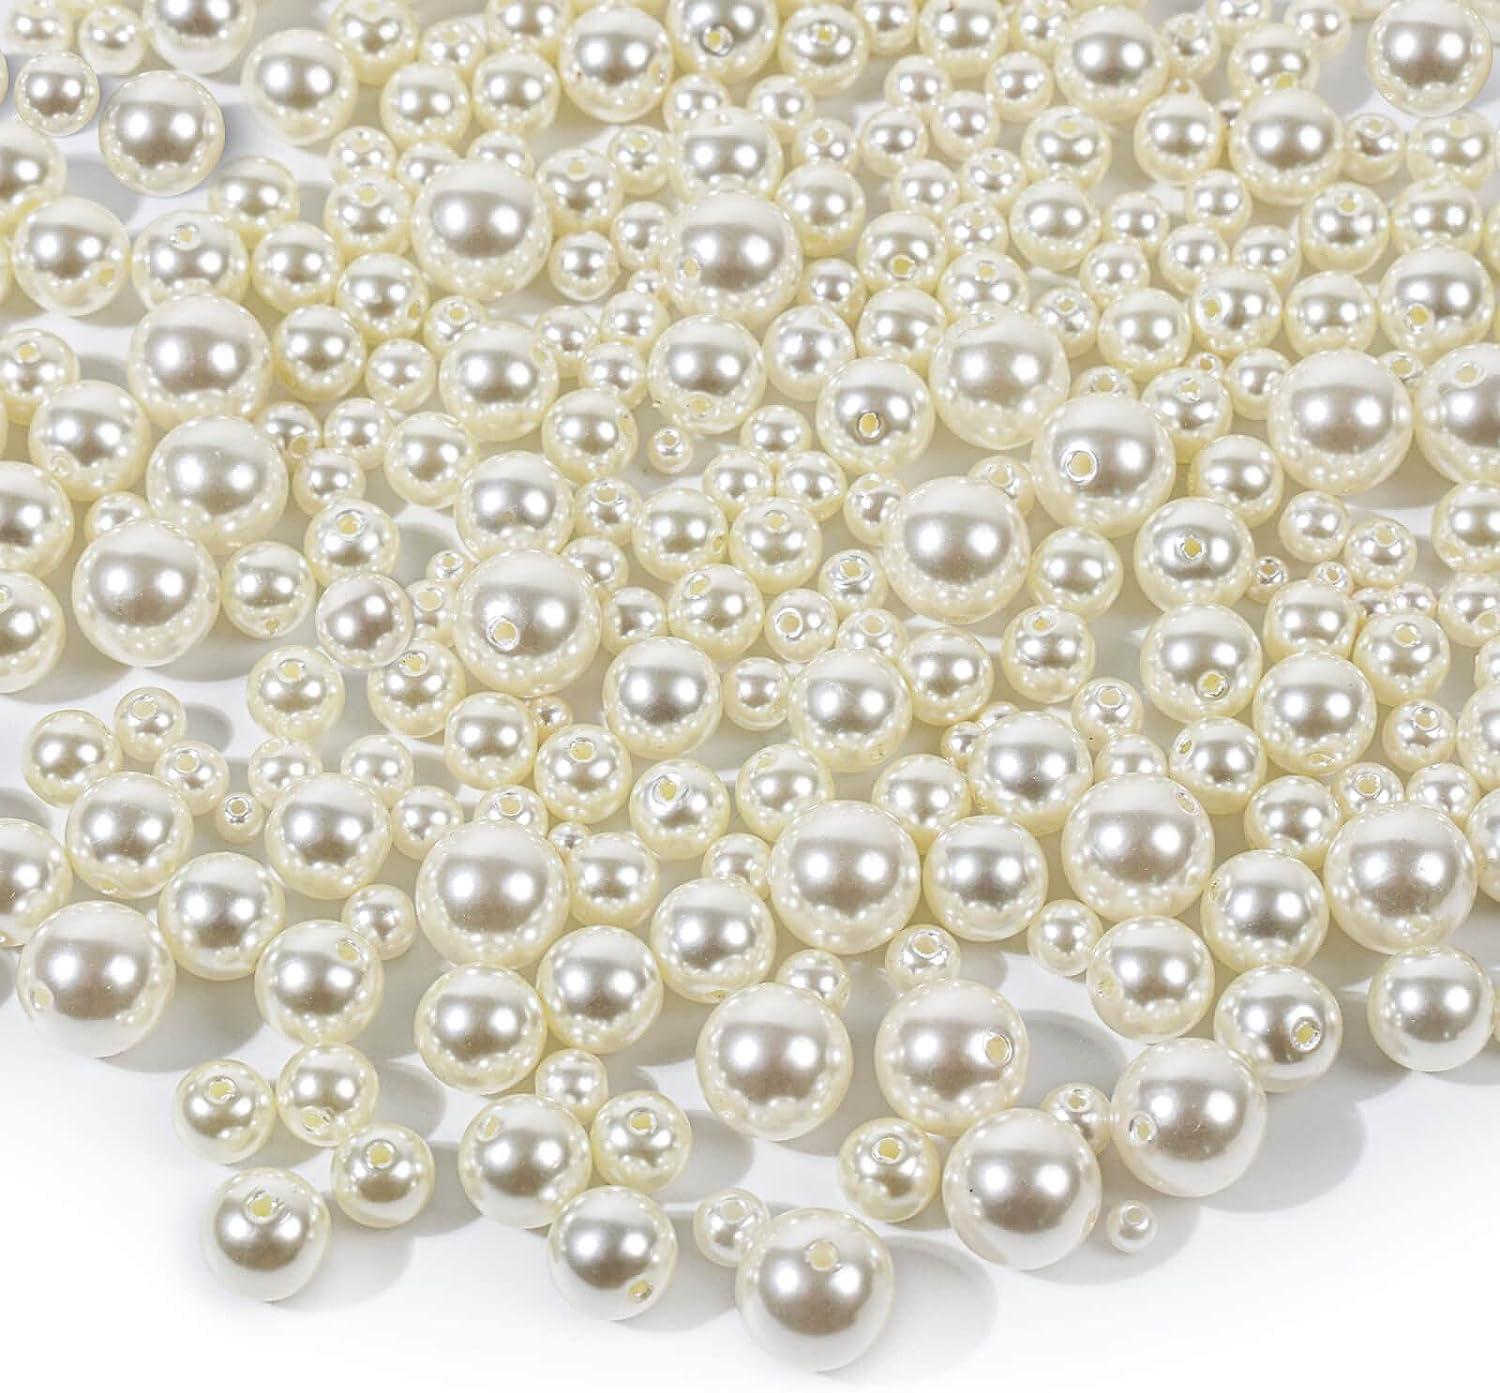 anezus Pearl Beads for Craft, 500pcs Ivory Faux Fake Pearls, 10 MM Small  Sew on Pearl Beads with Holes for Jewelry Making, Bracelets, Necklaces